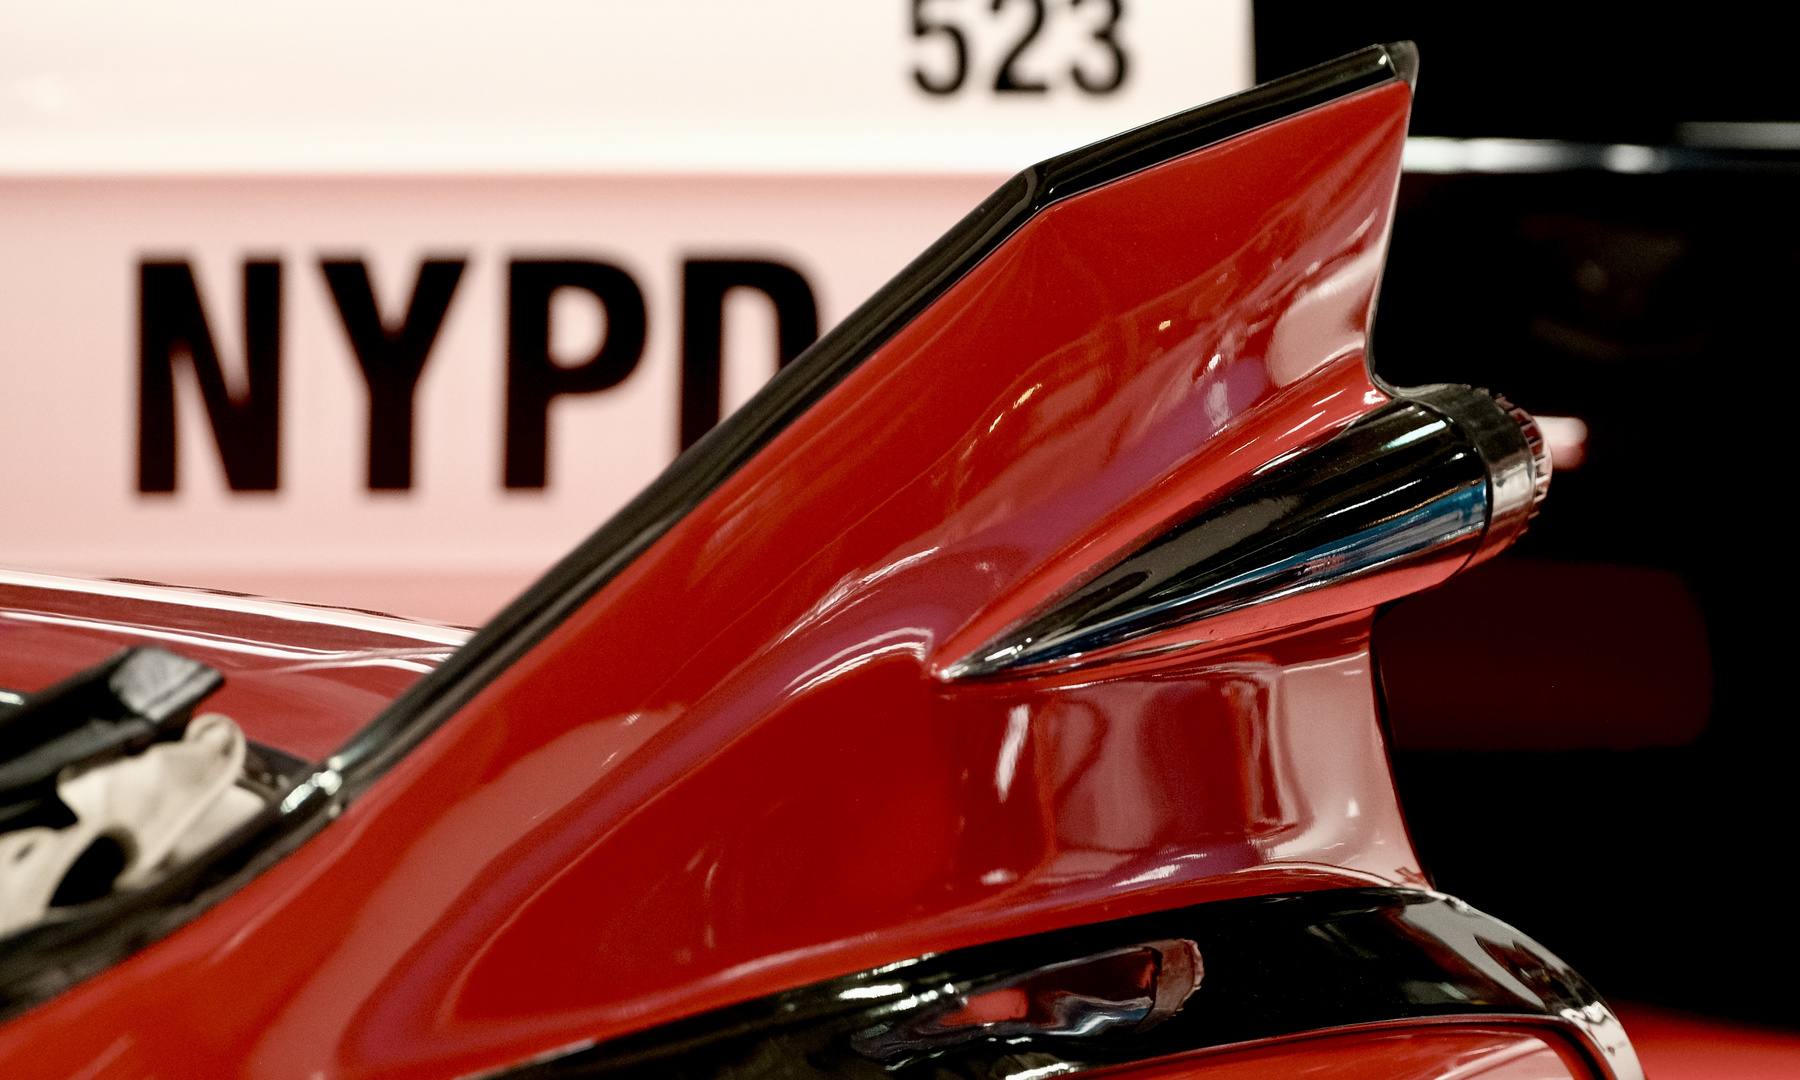 NYPD 523